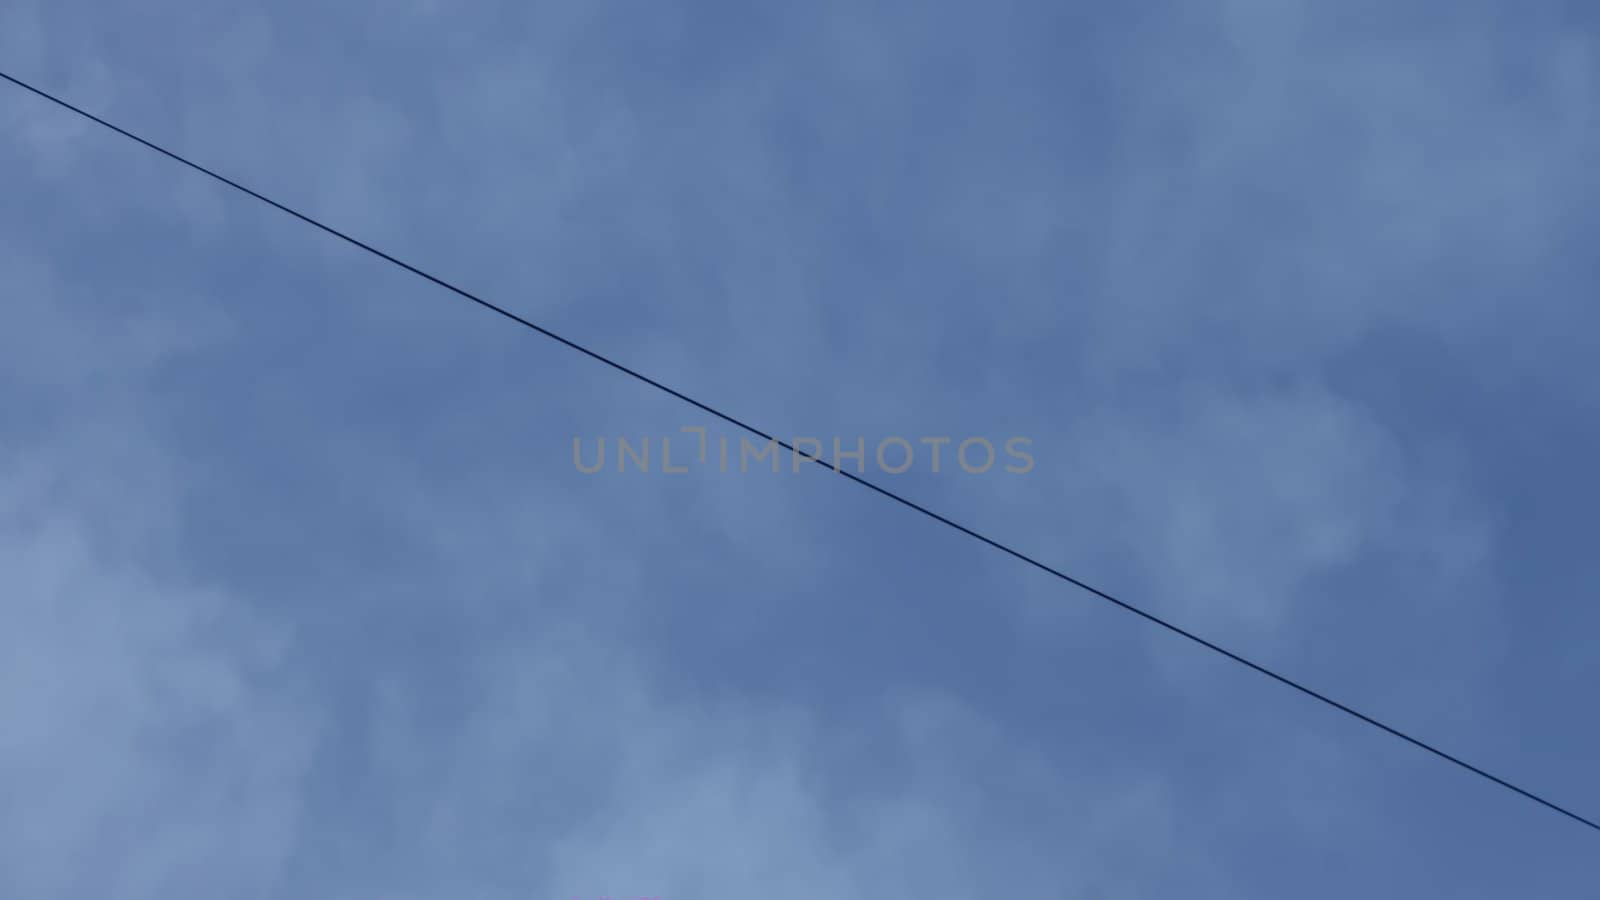 Tensioned wire in the blue evening sky with clouds